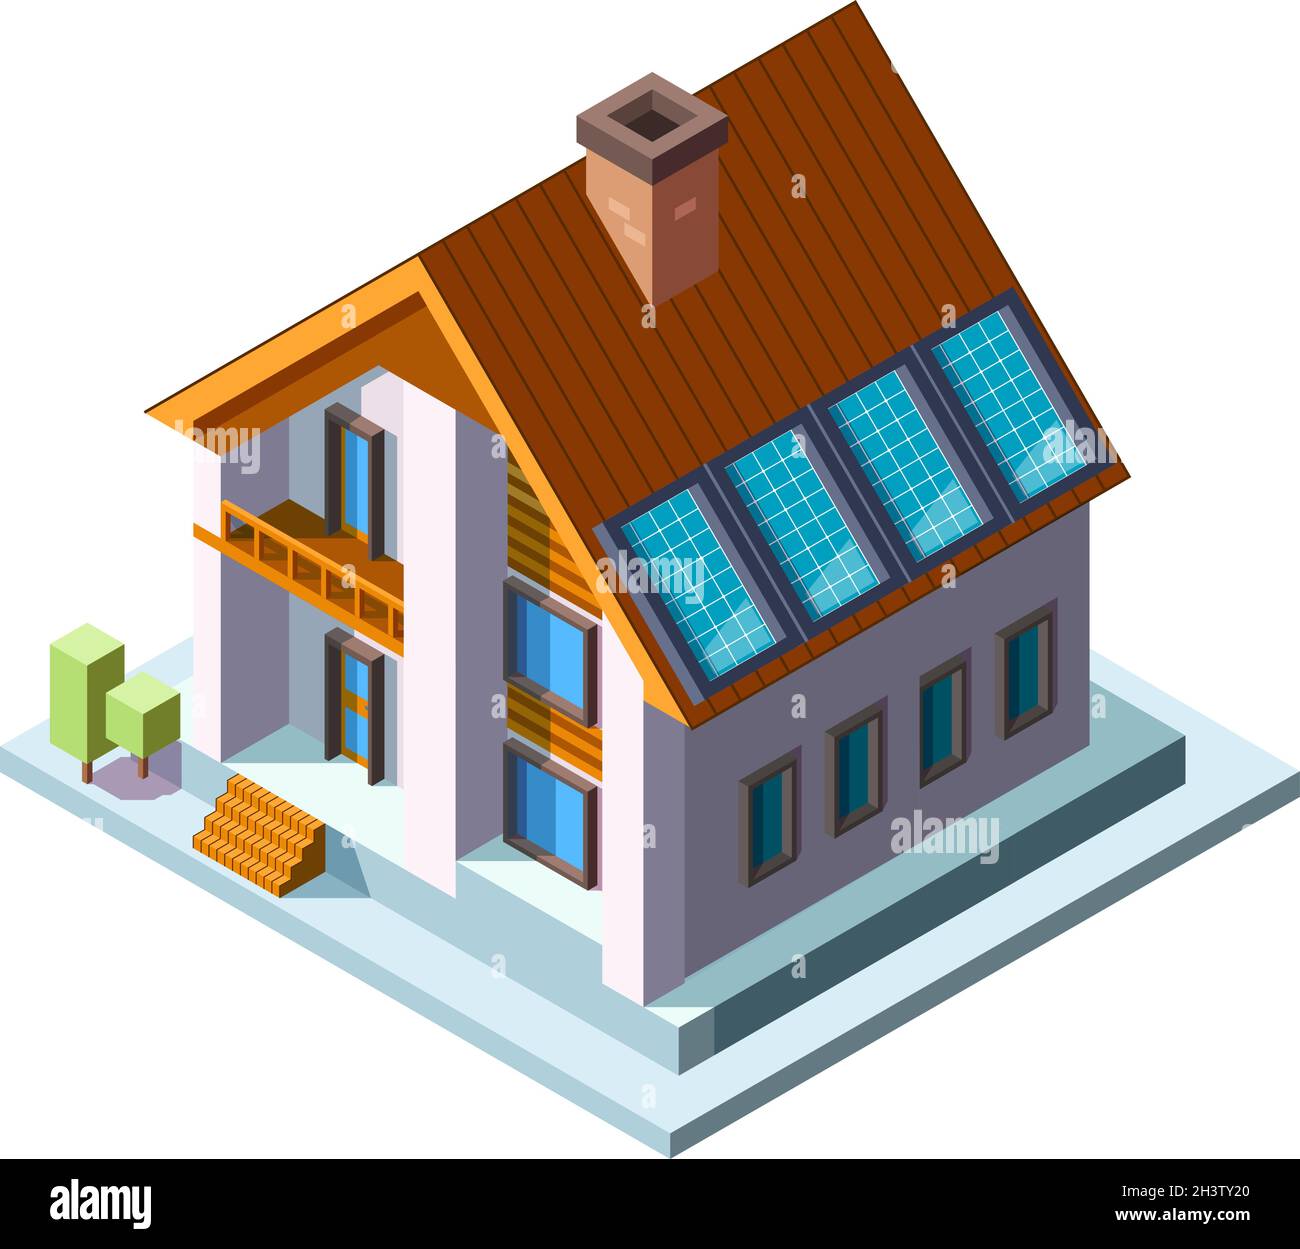 Solar panels on roof. Green eco energy sunny economy photovoltaic panels vector isometric house Stock Vector